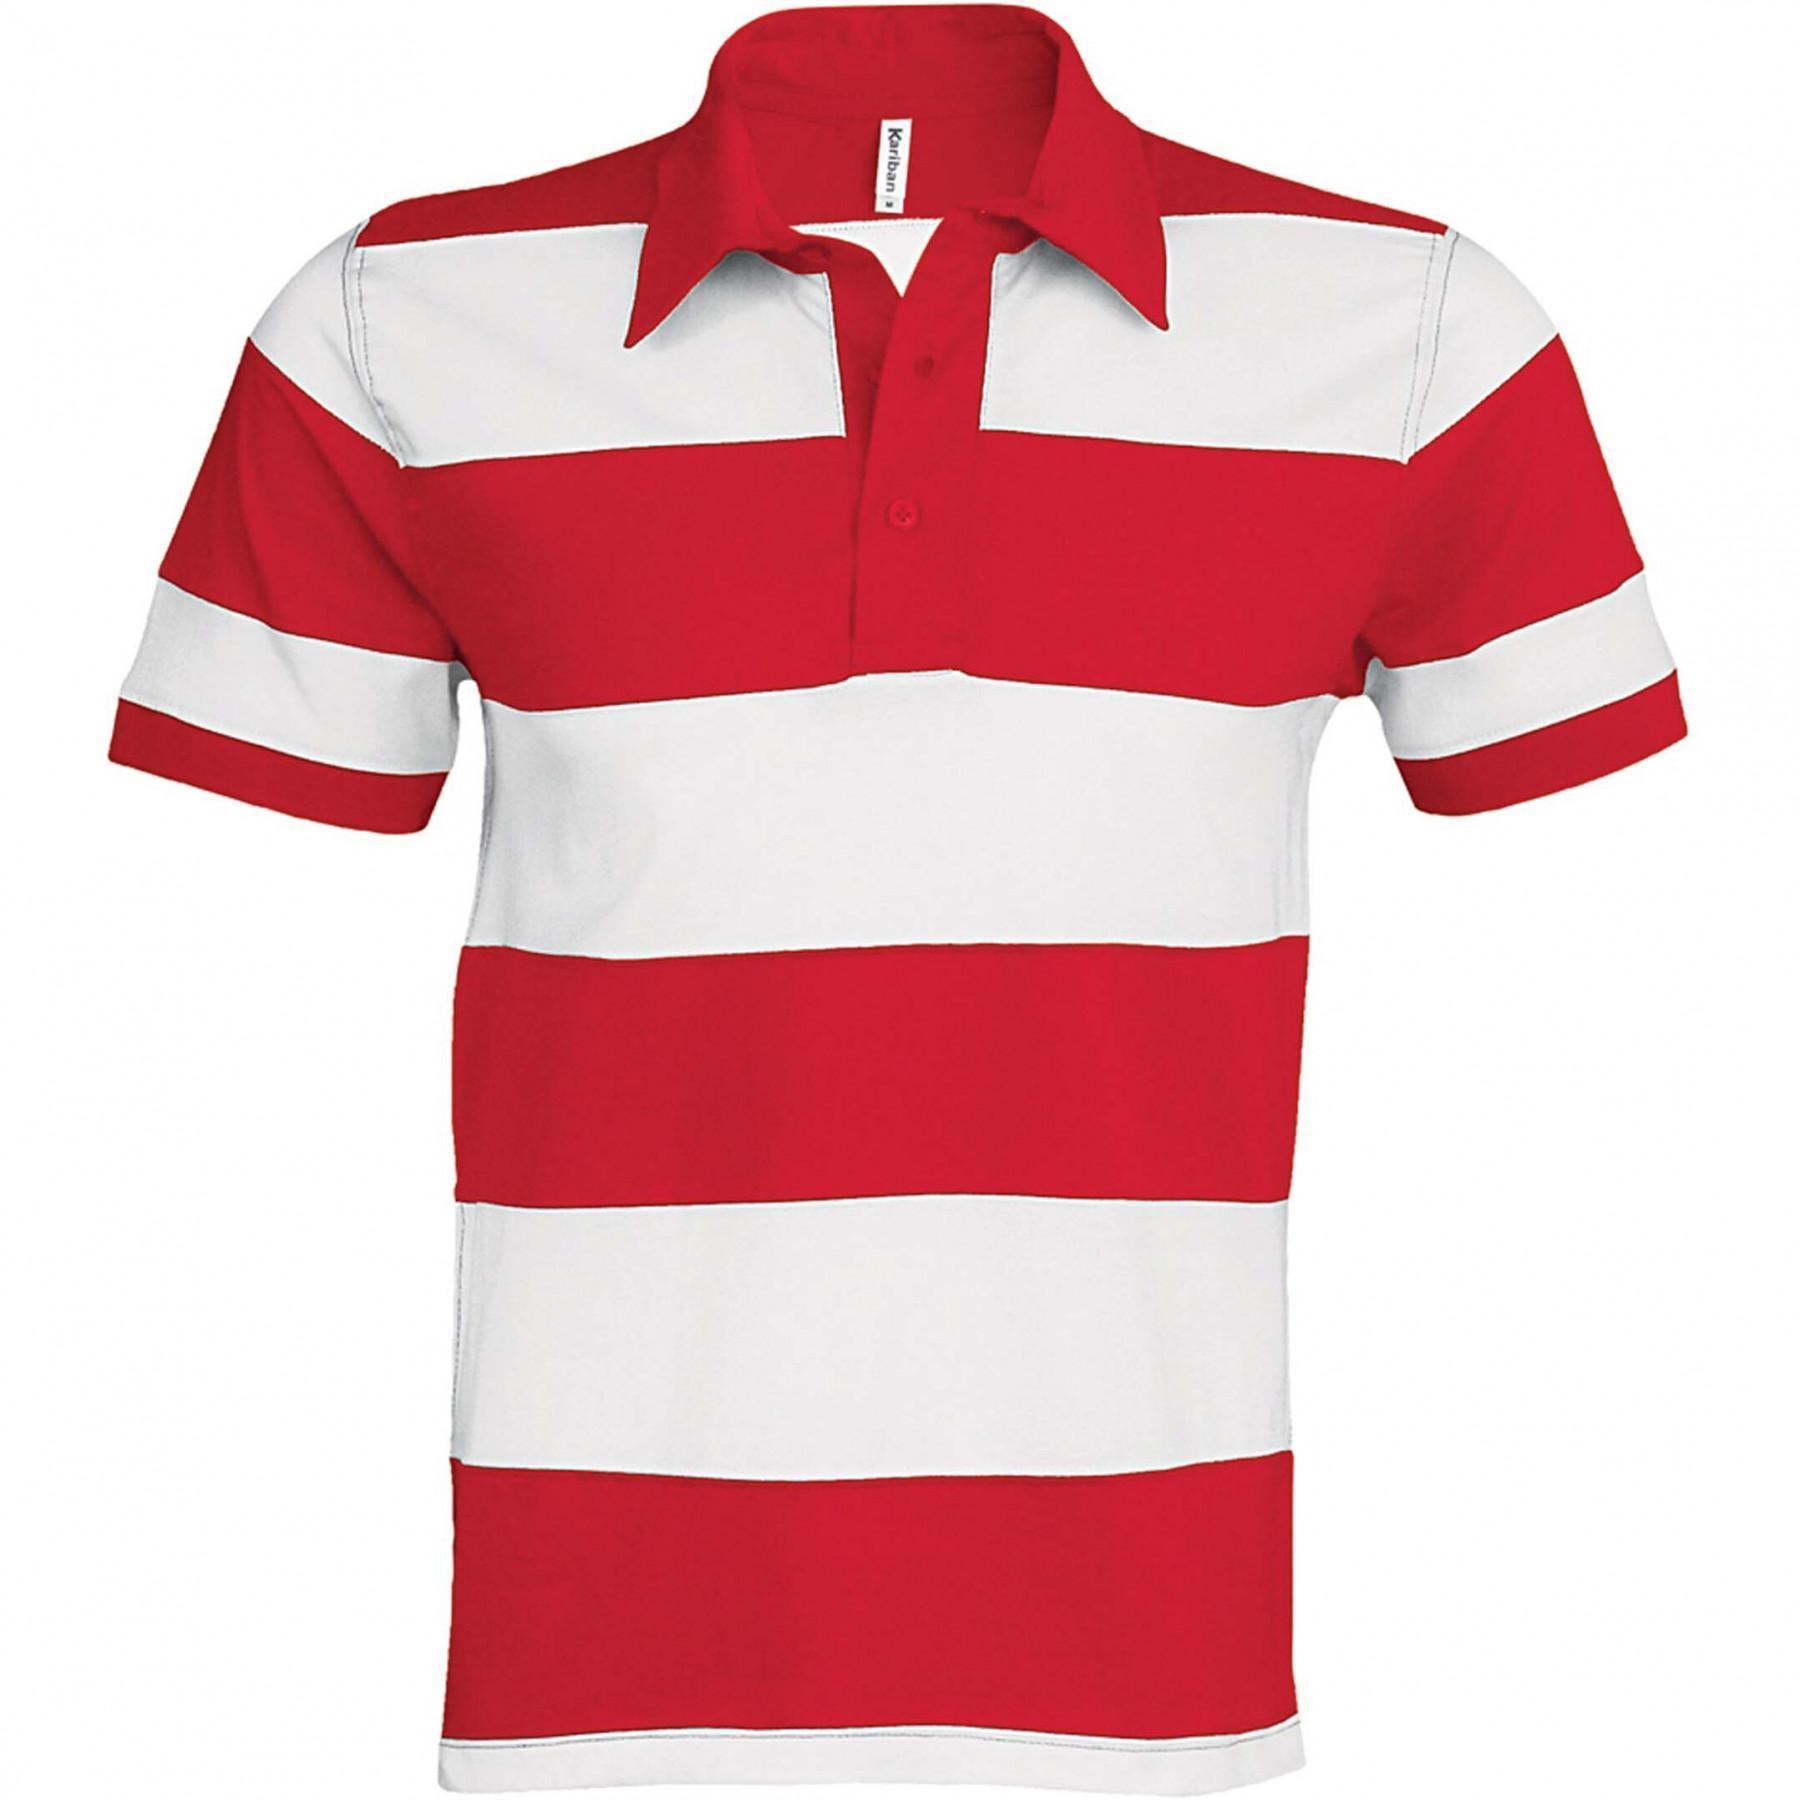 Ray > Rugby Striped Polo Shirt Short Sleeve